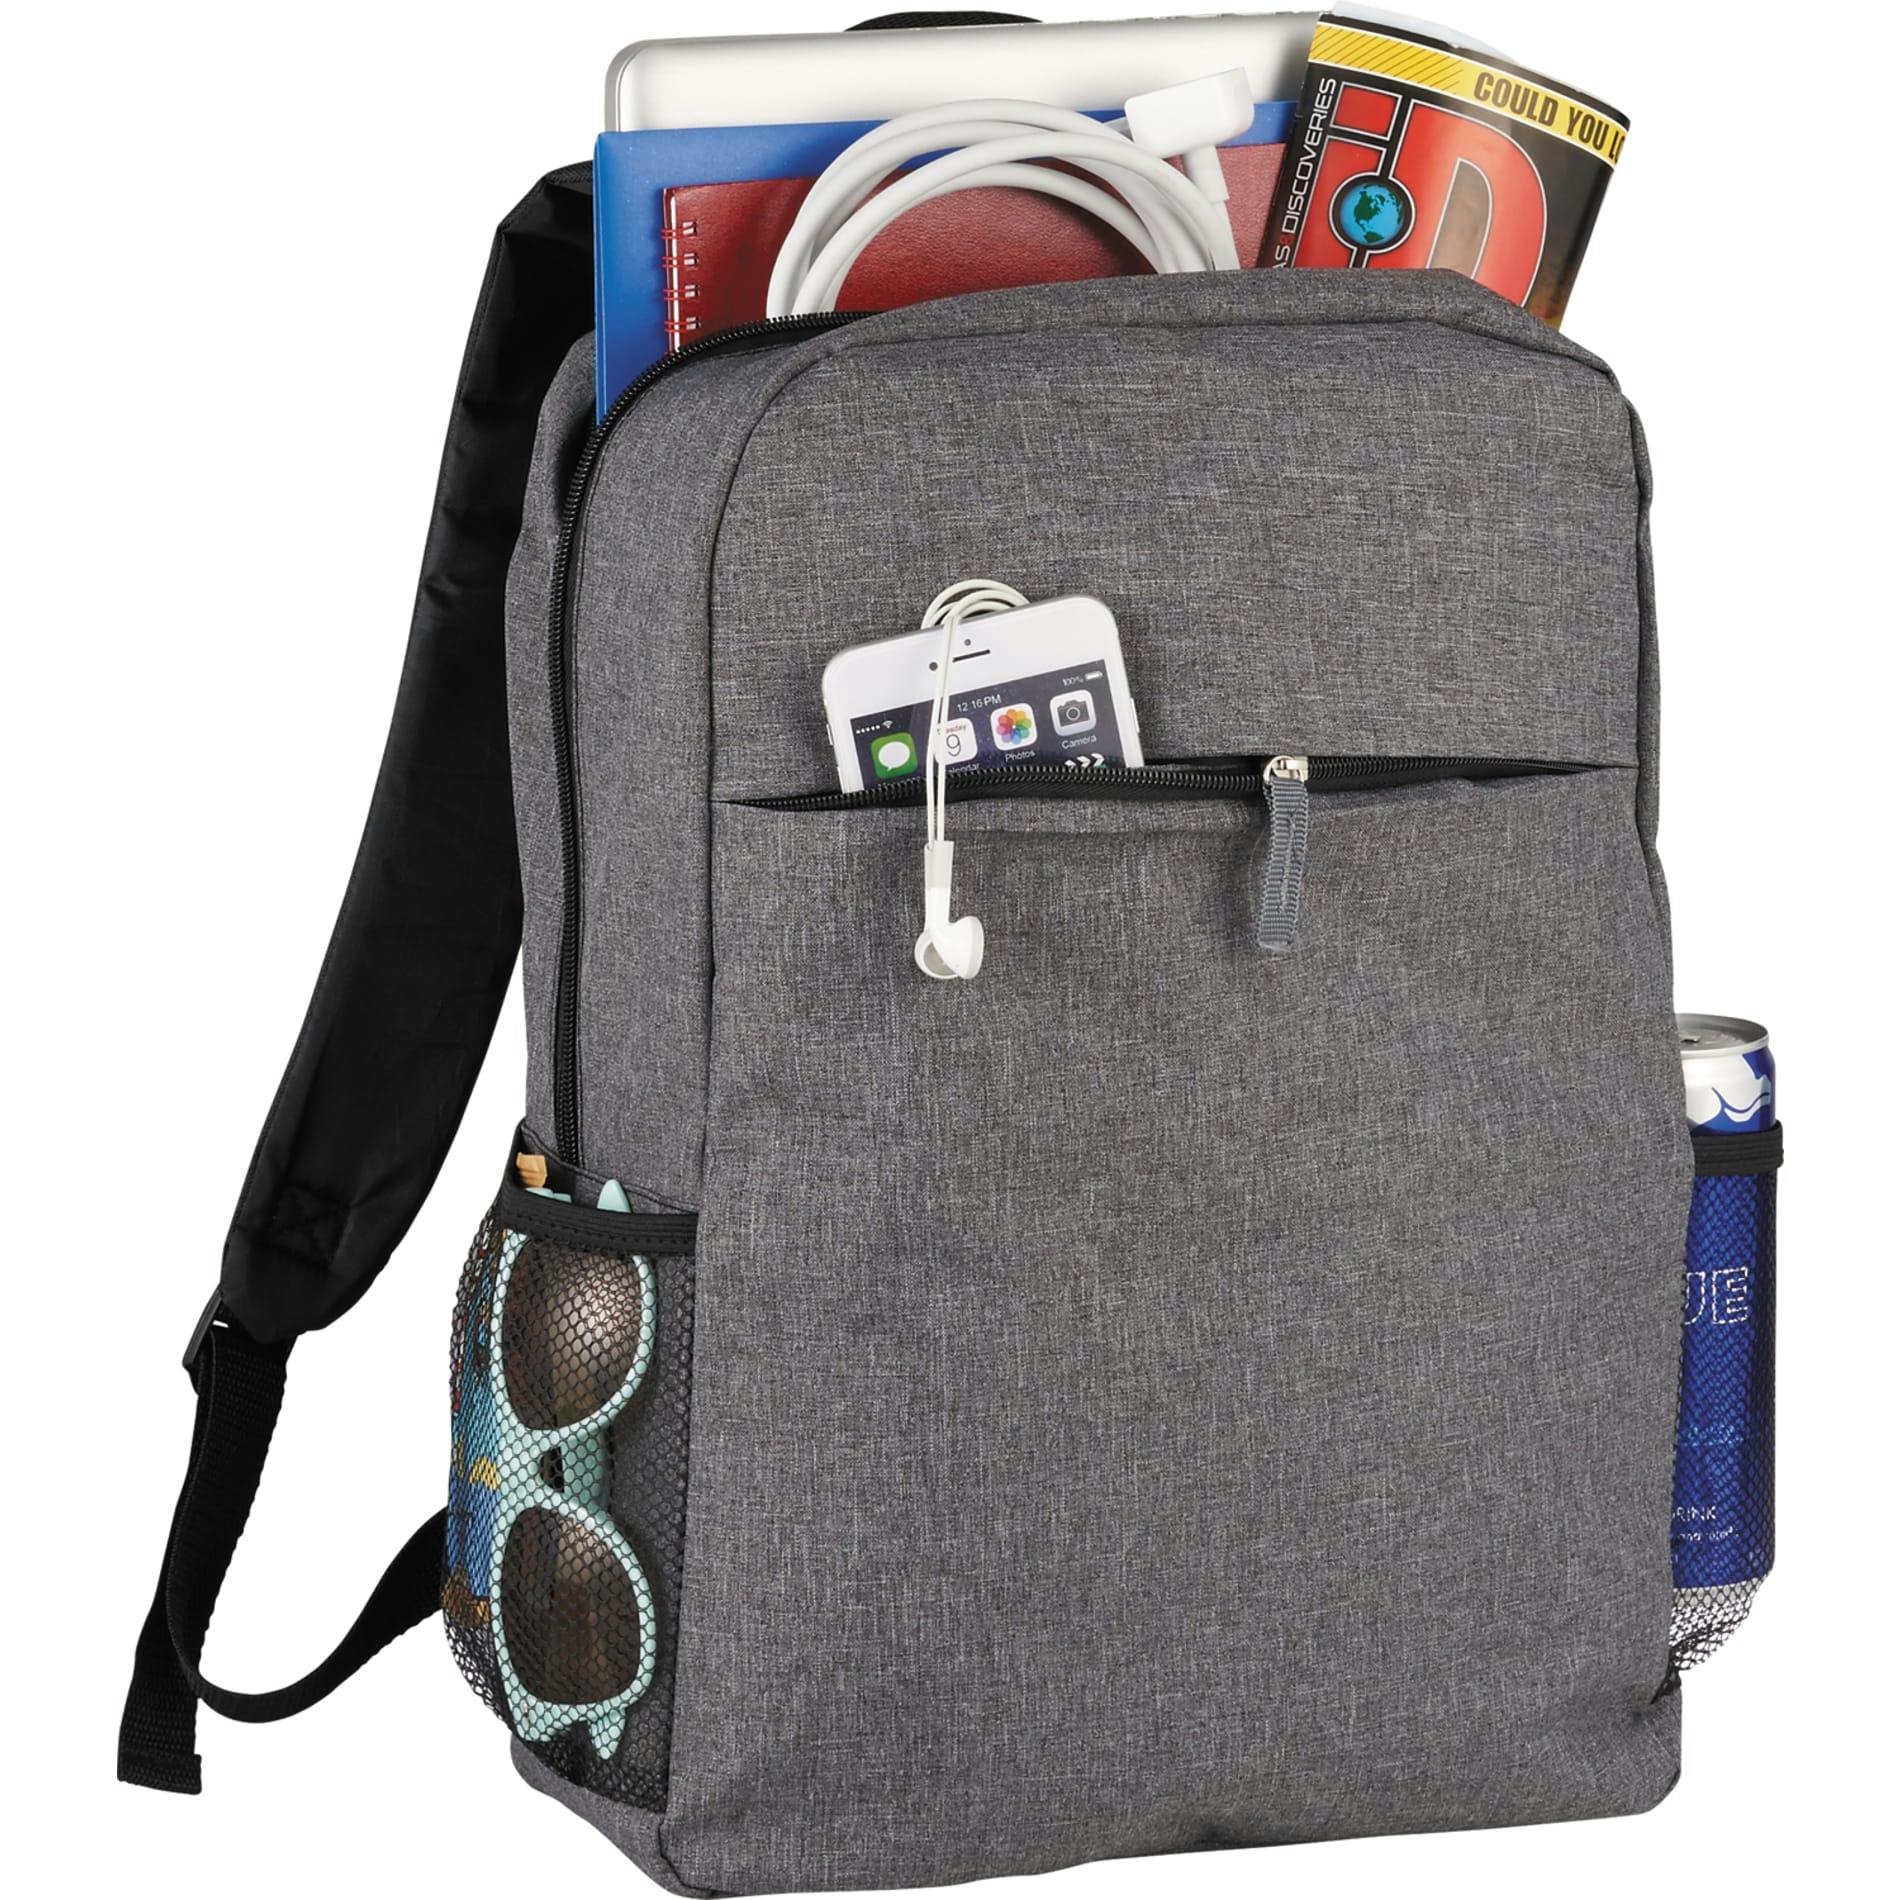 Urban 15" Computer Backpack - additional Image 2